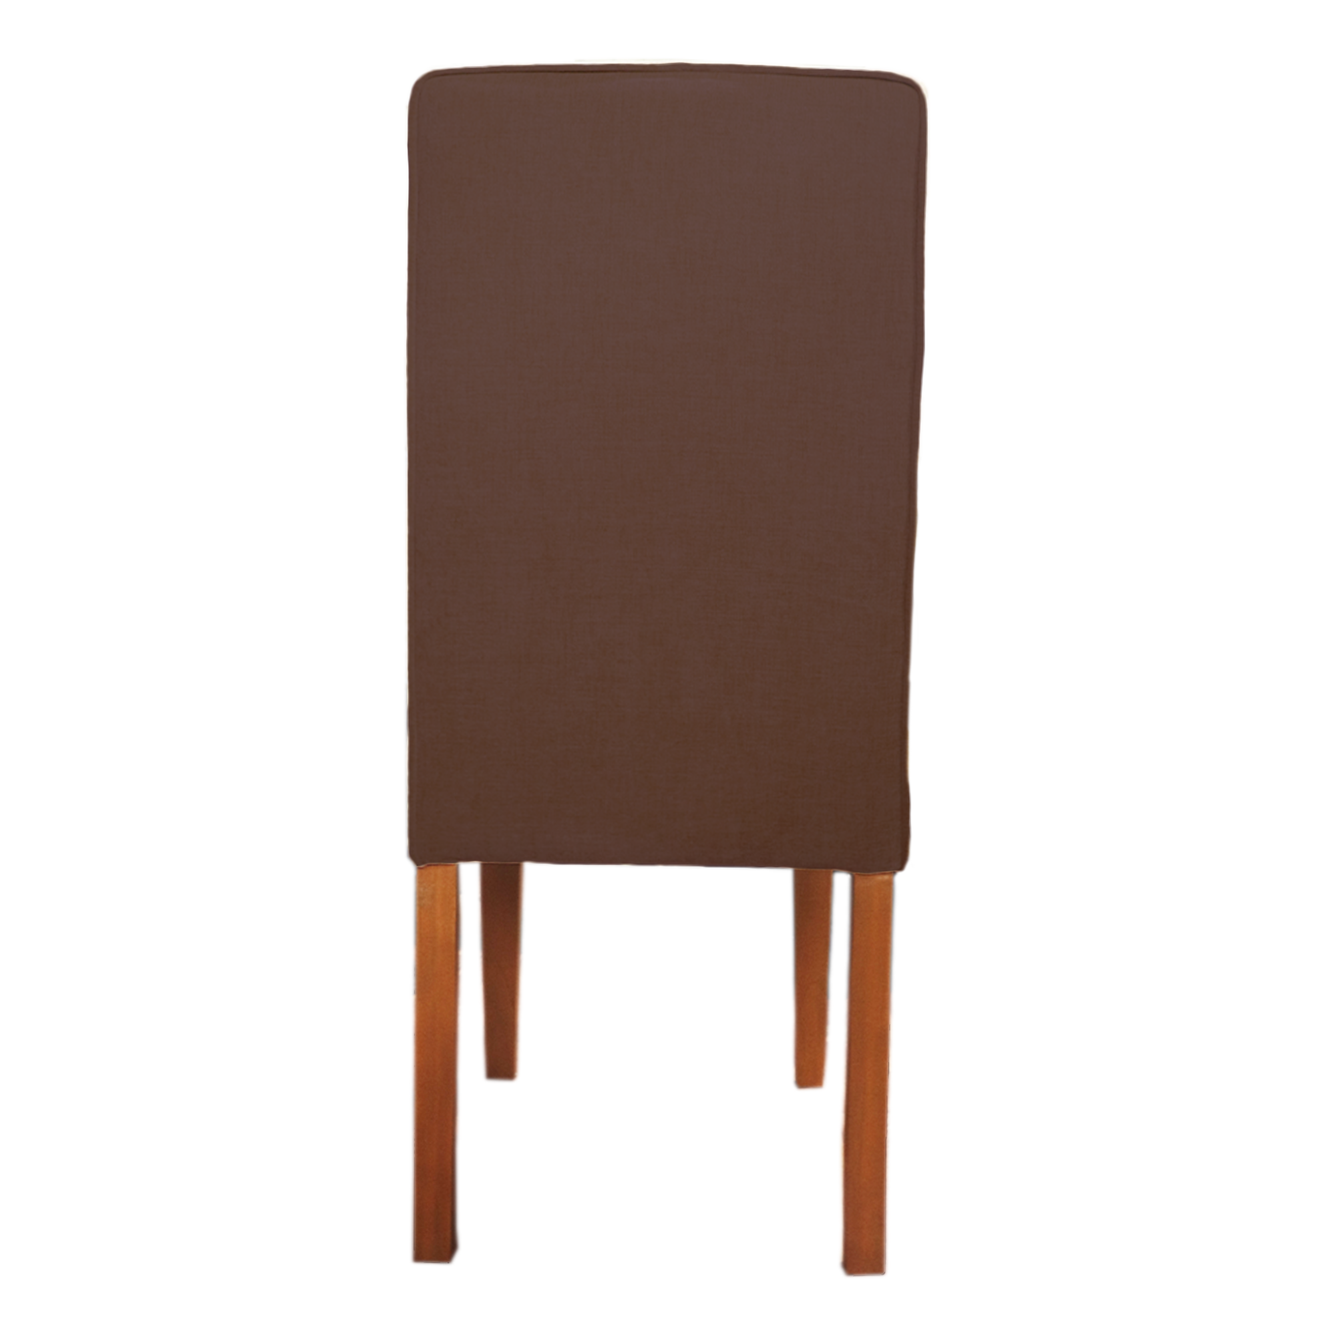 Mousse Full Back Solid Wood Dining Chair